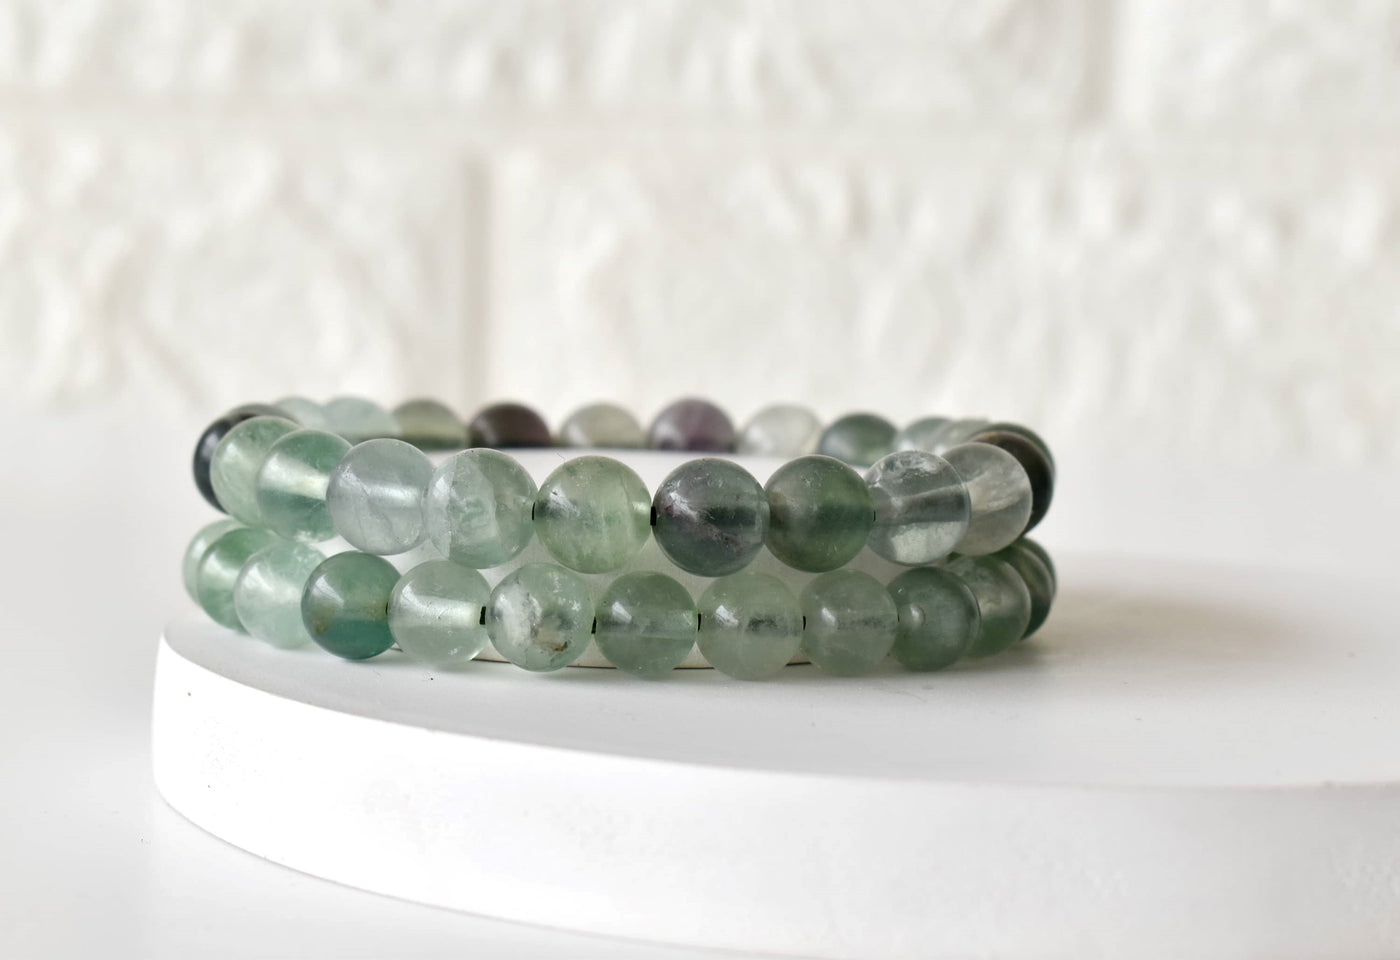 Green Fluorite Bracelet (Intuition and Sychic Awareness)